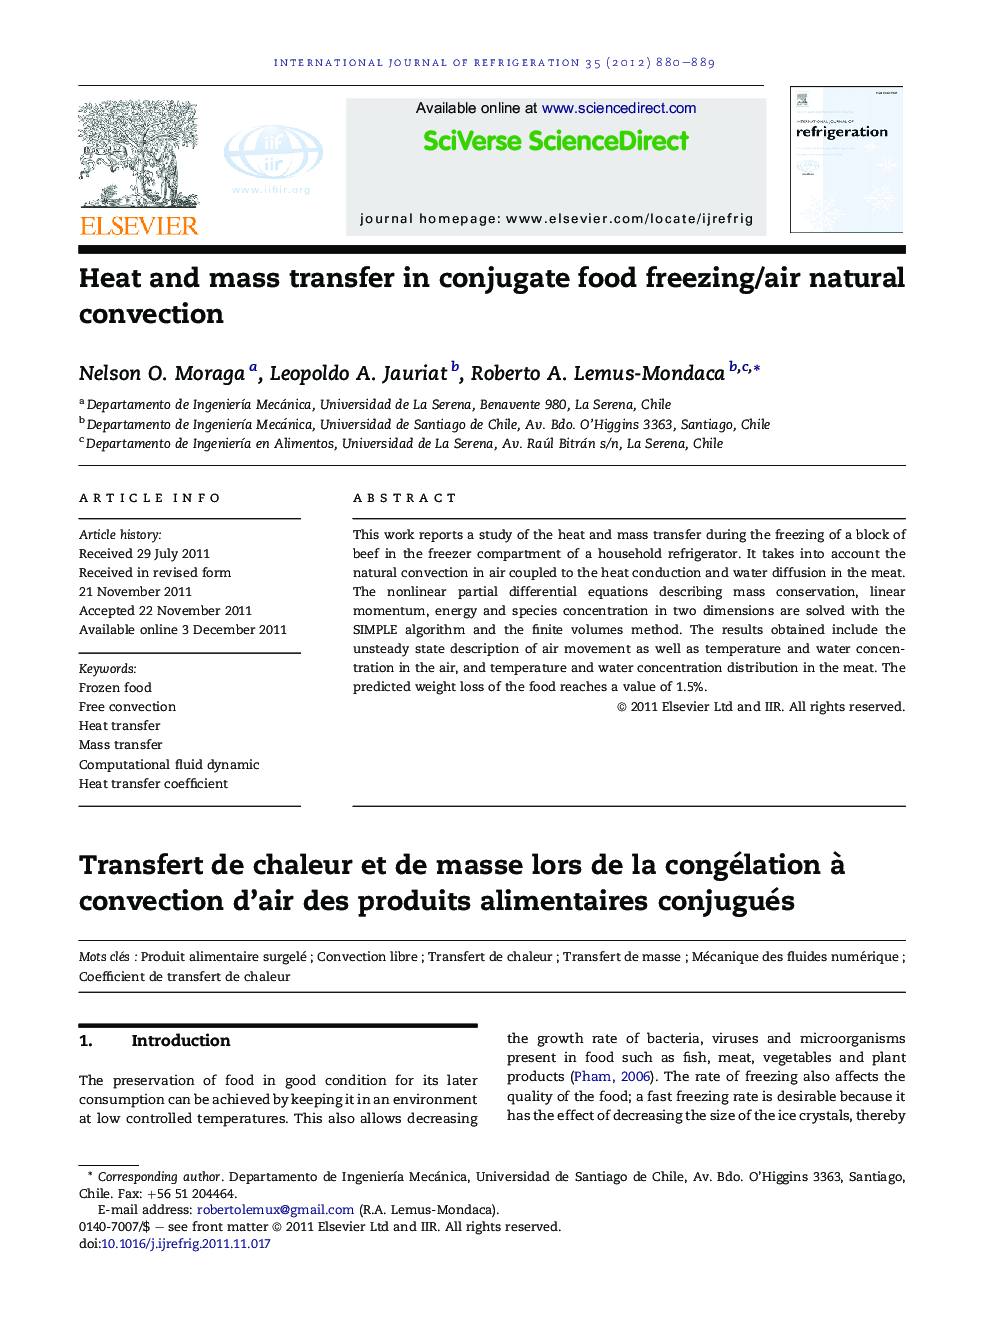 Heat and mass transfer in conjugate food freezing/air natural convection